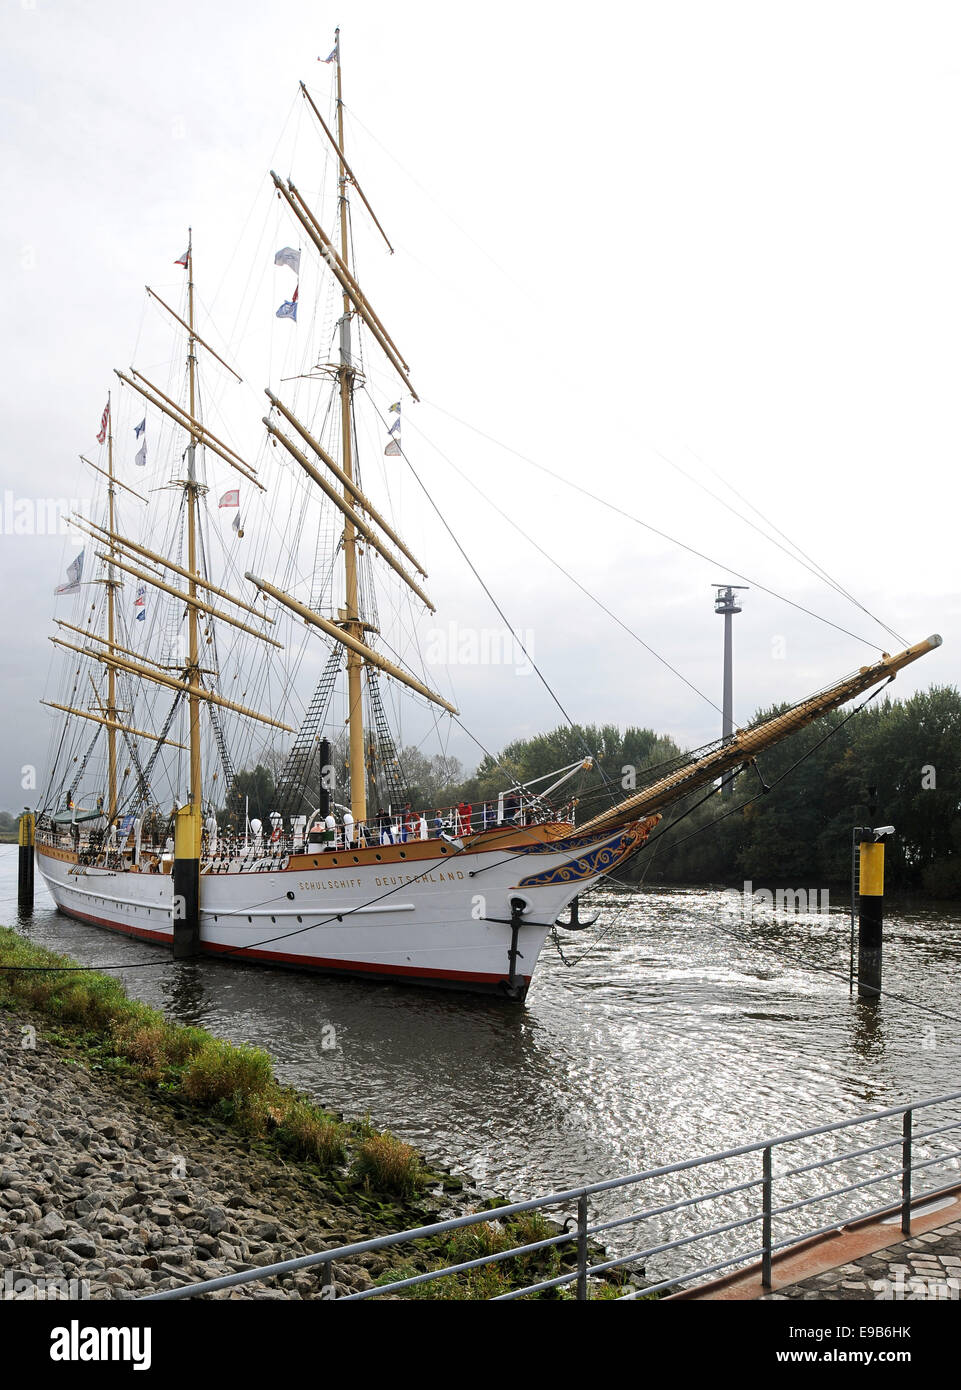 Bremen, Germany. 23rd Oct, 2014. The white tall ship 'Schulschiff Deutschland' (lit. school ship Germany) leaves its berth in Bremen, Germany, 23 October 2014. The last existing German full-rigged ship is taken to a wharf in Bremerhaven for repair works. The hull of the 87 year old ship has been damaged by rust. The repair works will cost about one million Euro. Photo: Ingo Wagner/dpa/Alamy Live News Stock Photo